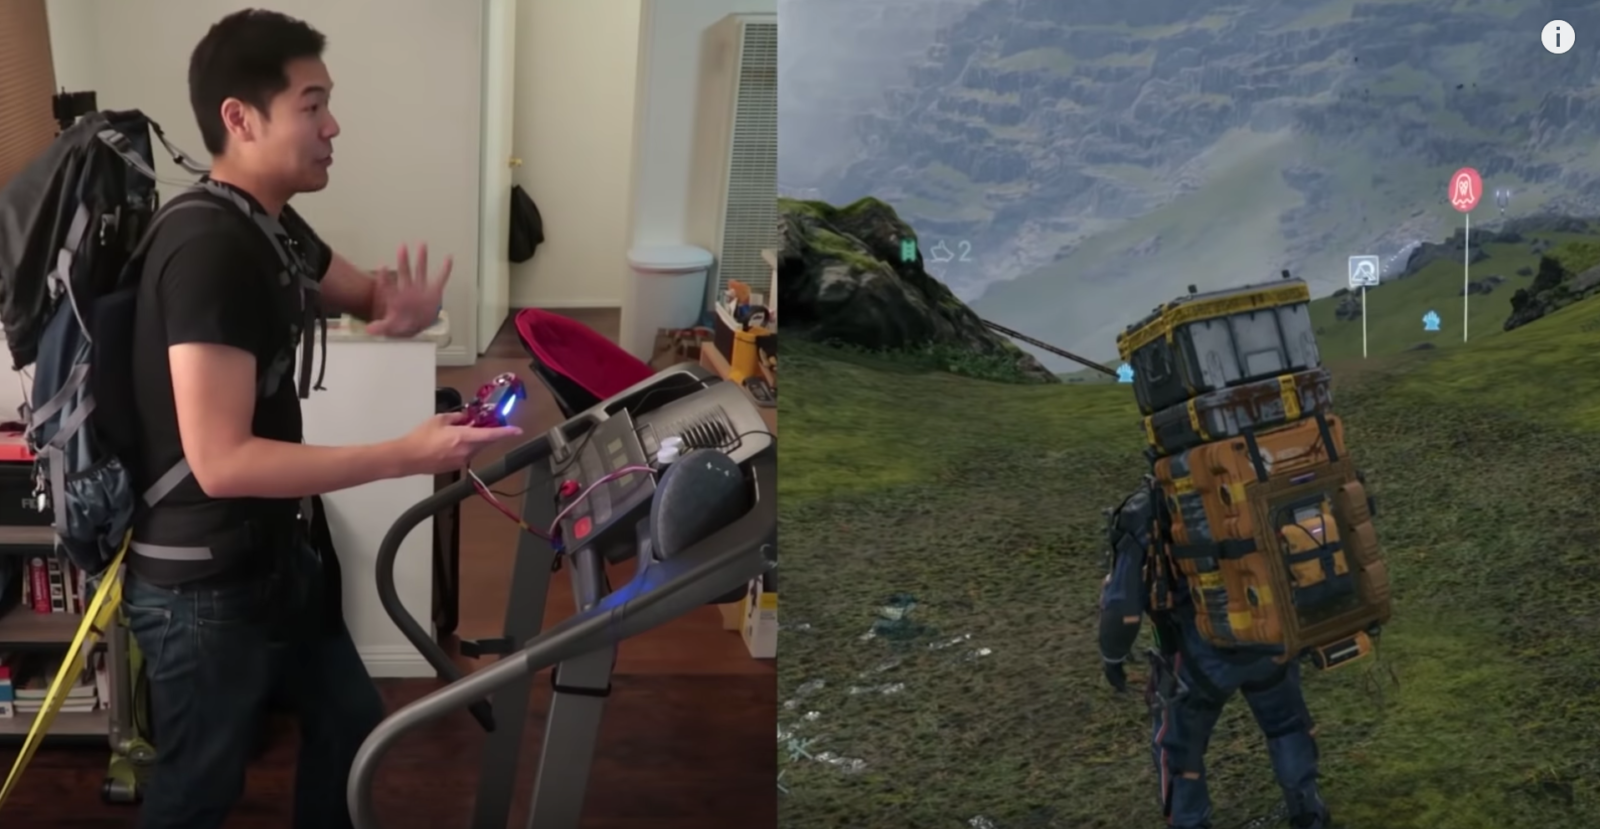 YouTuber Converts a Treadmill into a PS4 Controller to Exercise While He Plays Death Stranding - WORLD OF BUZZ 4